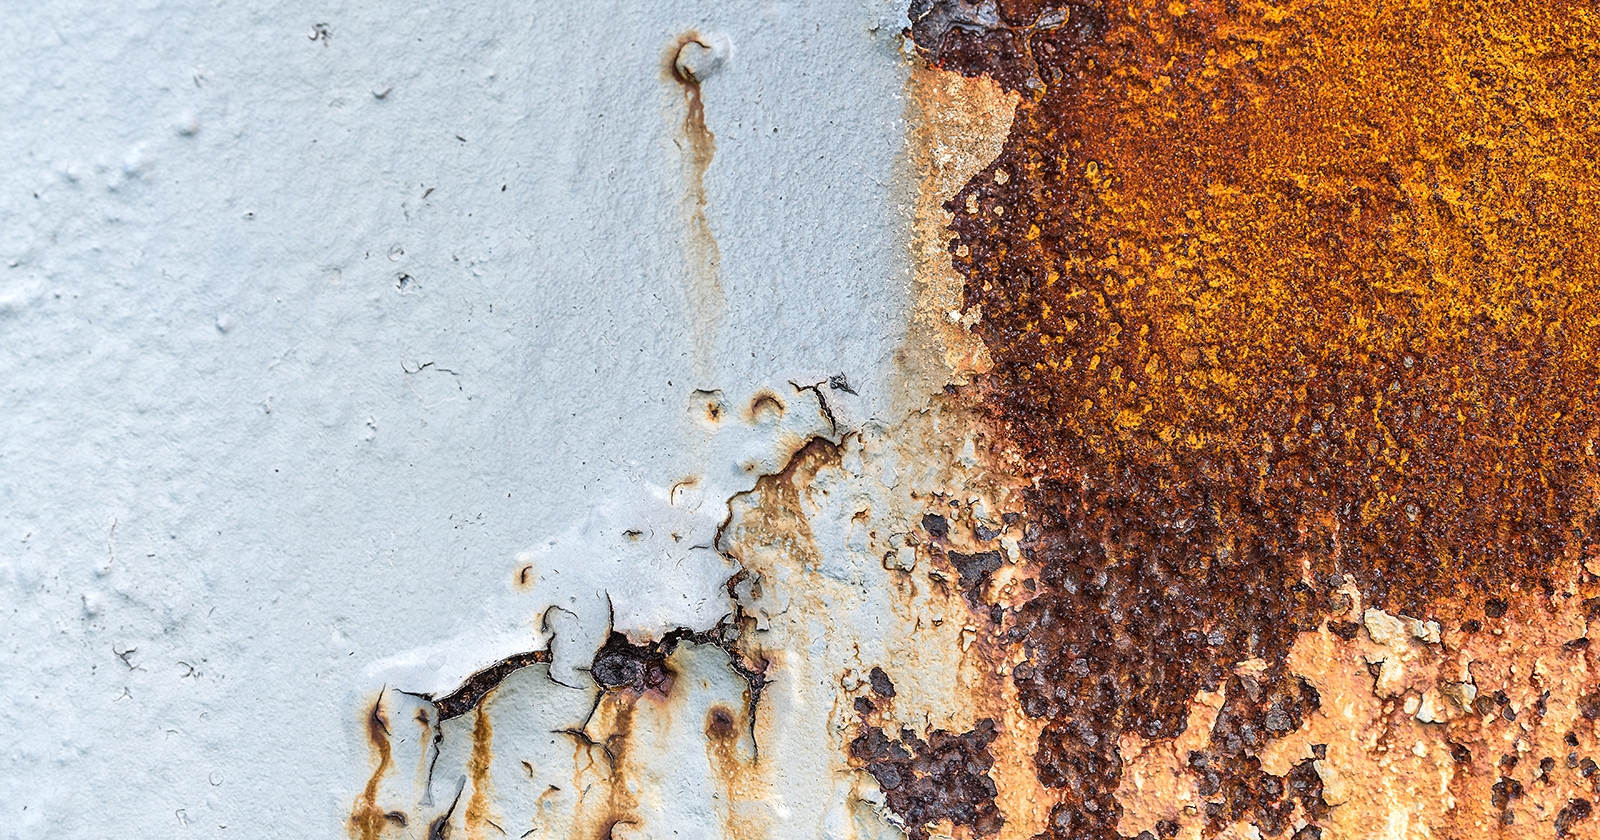 Exposed rust and flaking material on an exterior surface. Exponent materials and corrosion engineering support.